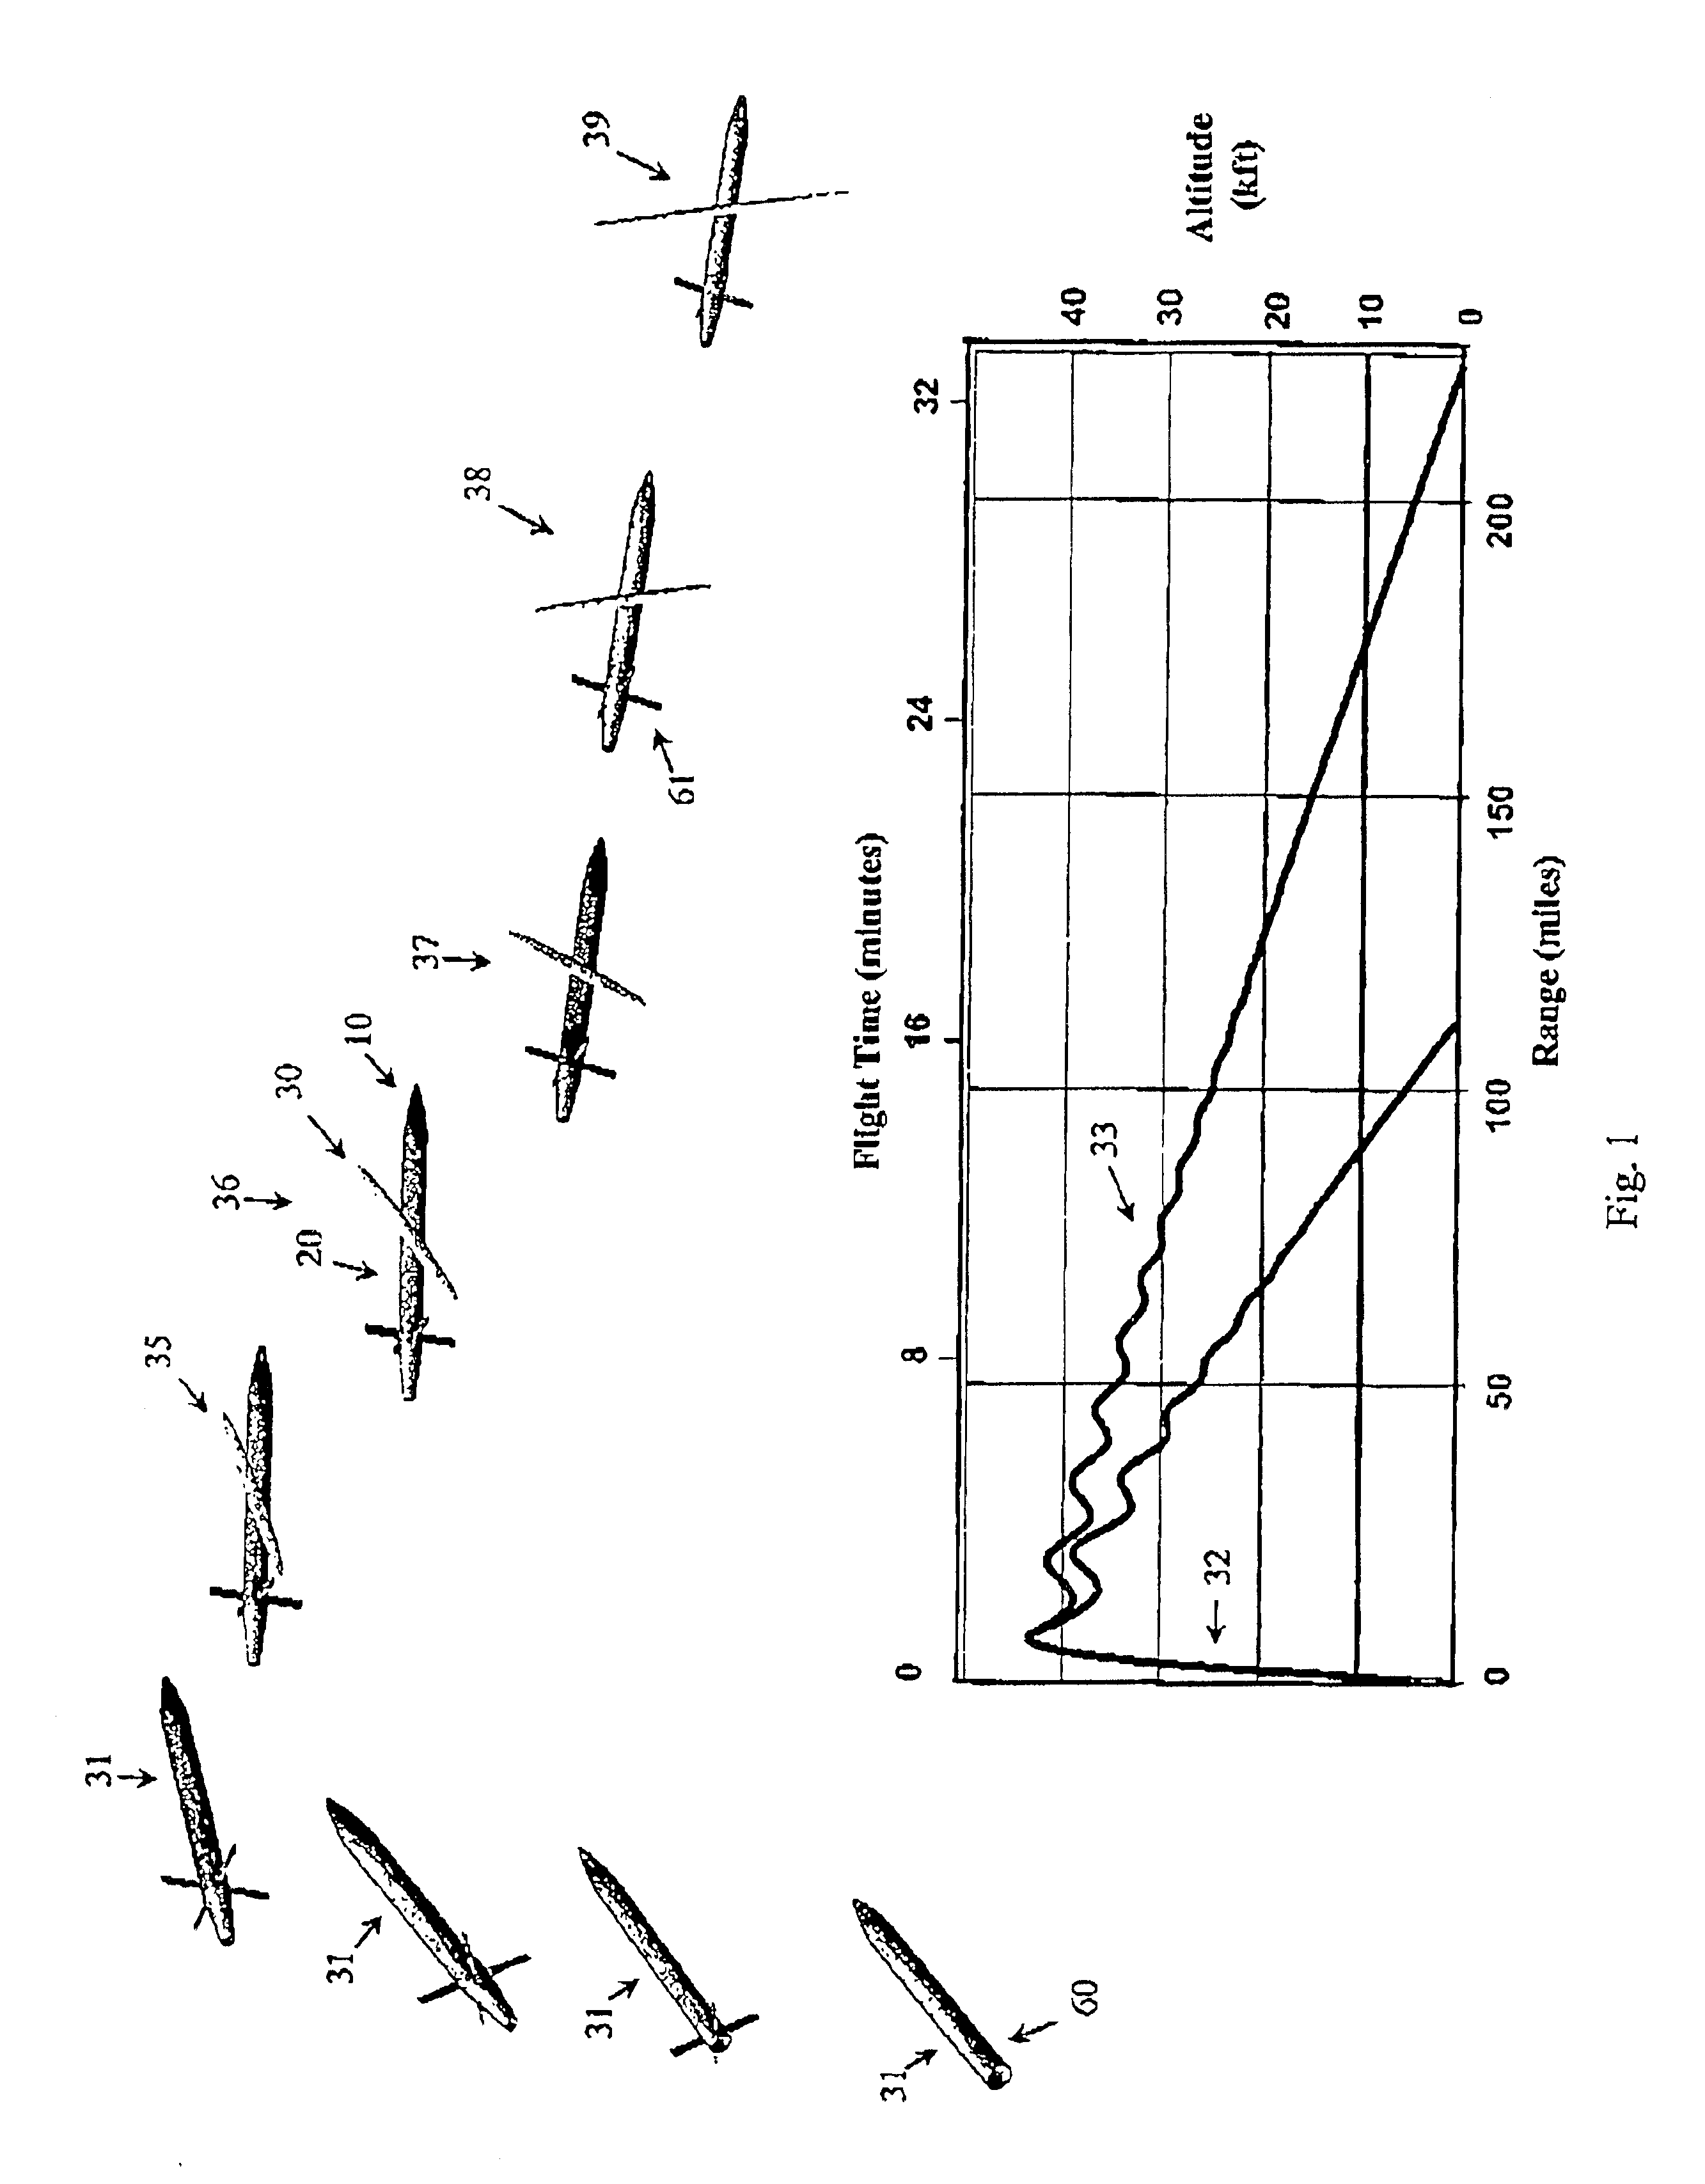 Apparatus and methods for variable sweep body conformal wing with application to projectiles, missiles, and unmanned air vehicles